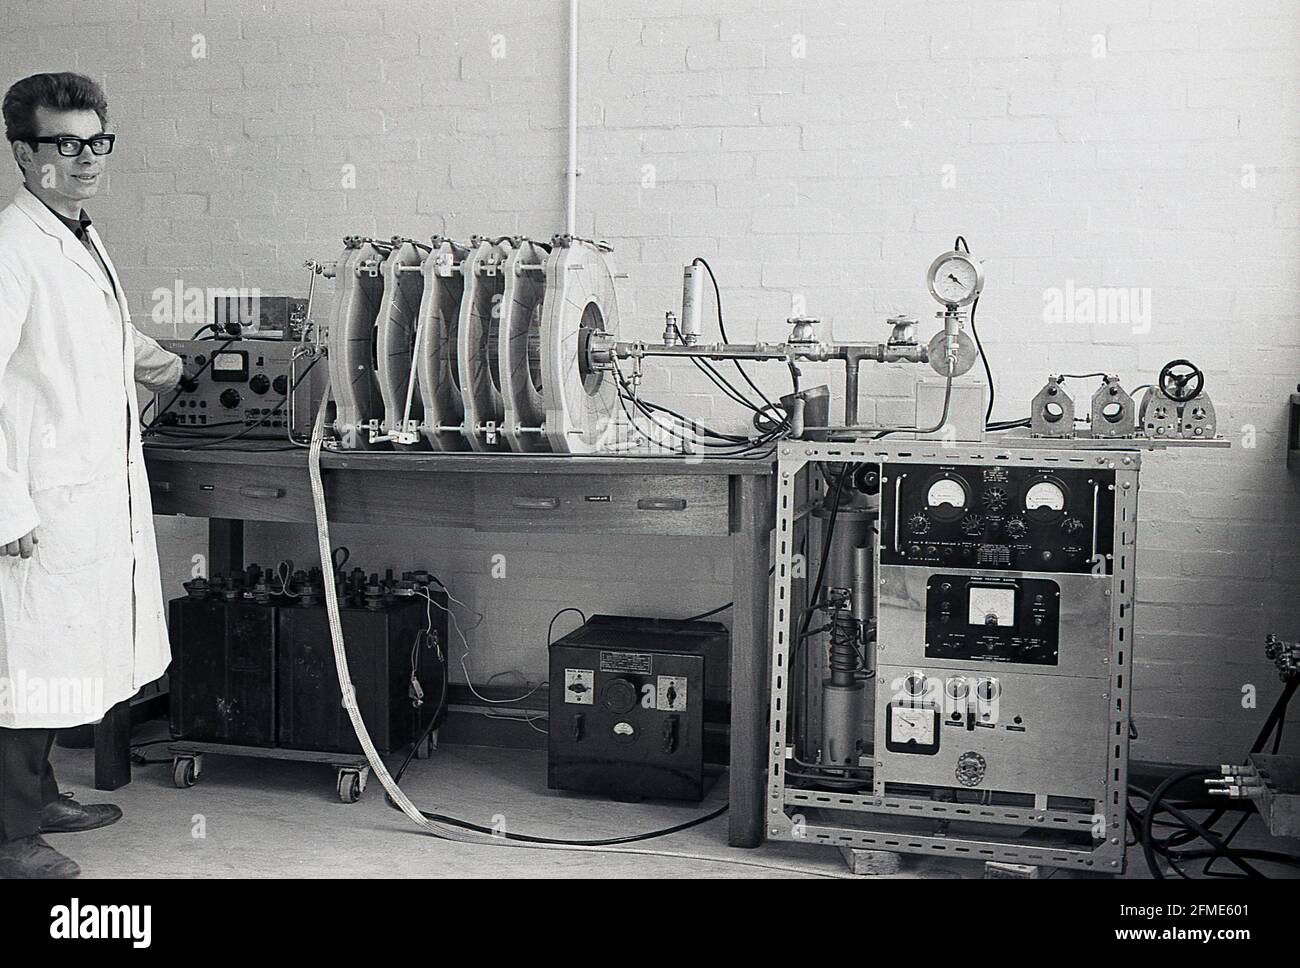 1963, historical, a white-coated male technician standing beside equipment being tested by an oscilloscope, often known simply as a scope or o-scope, a type of electronic test instrument that graphically displays signal voltages and measures voltage waves. Stock Photo